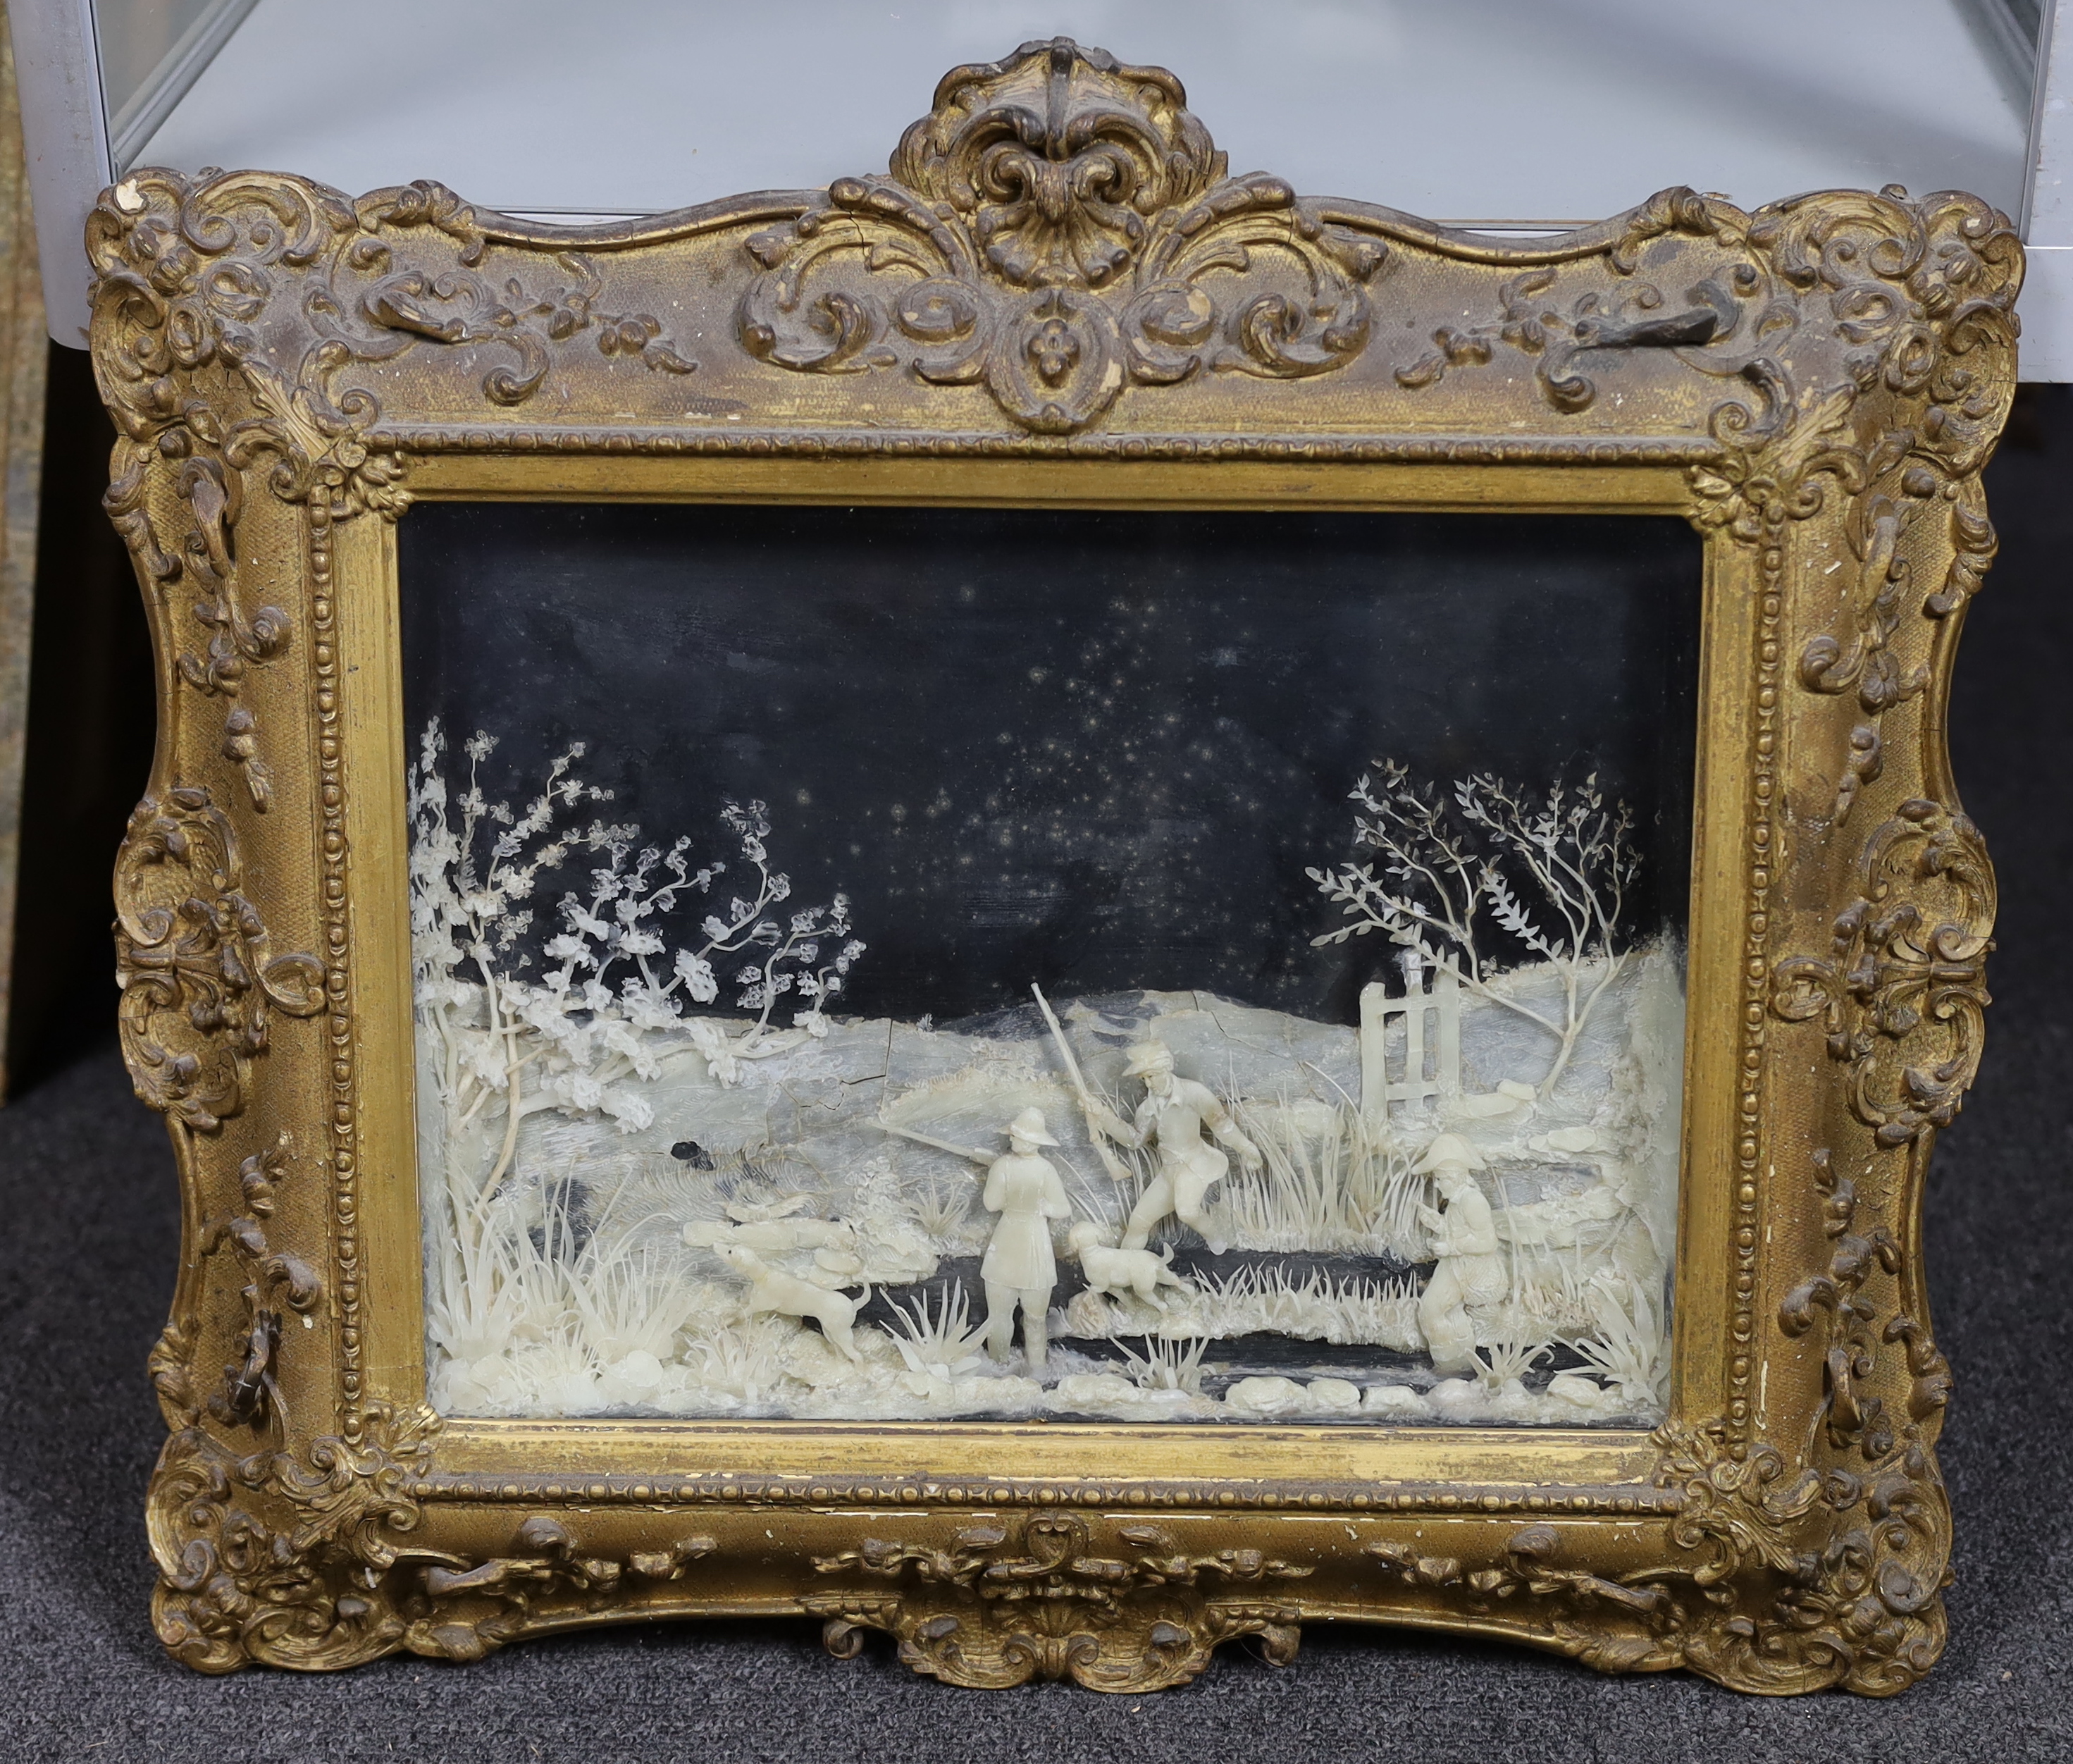 A rare pair of mid 19th century carved wax pictures, depicting sportsman and dogs in a wetland - Image 6 of 8